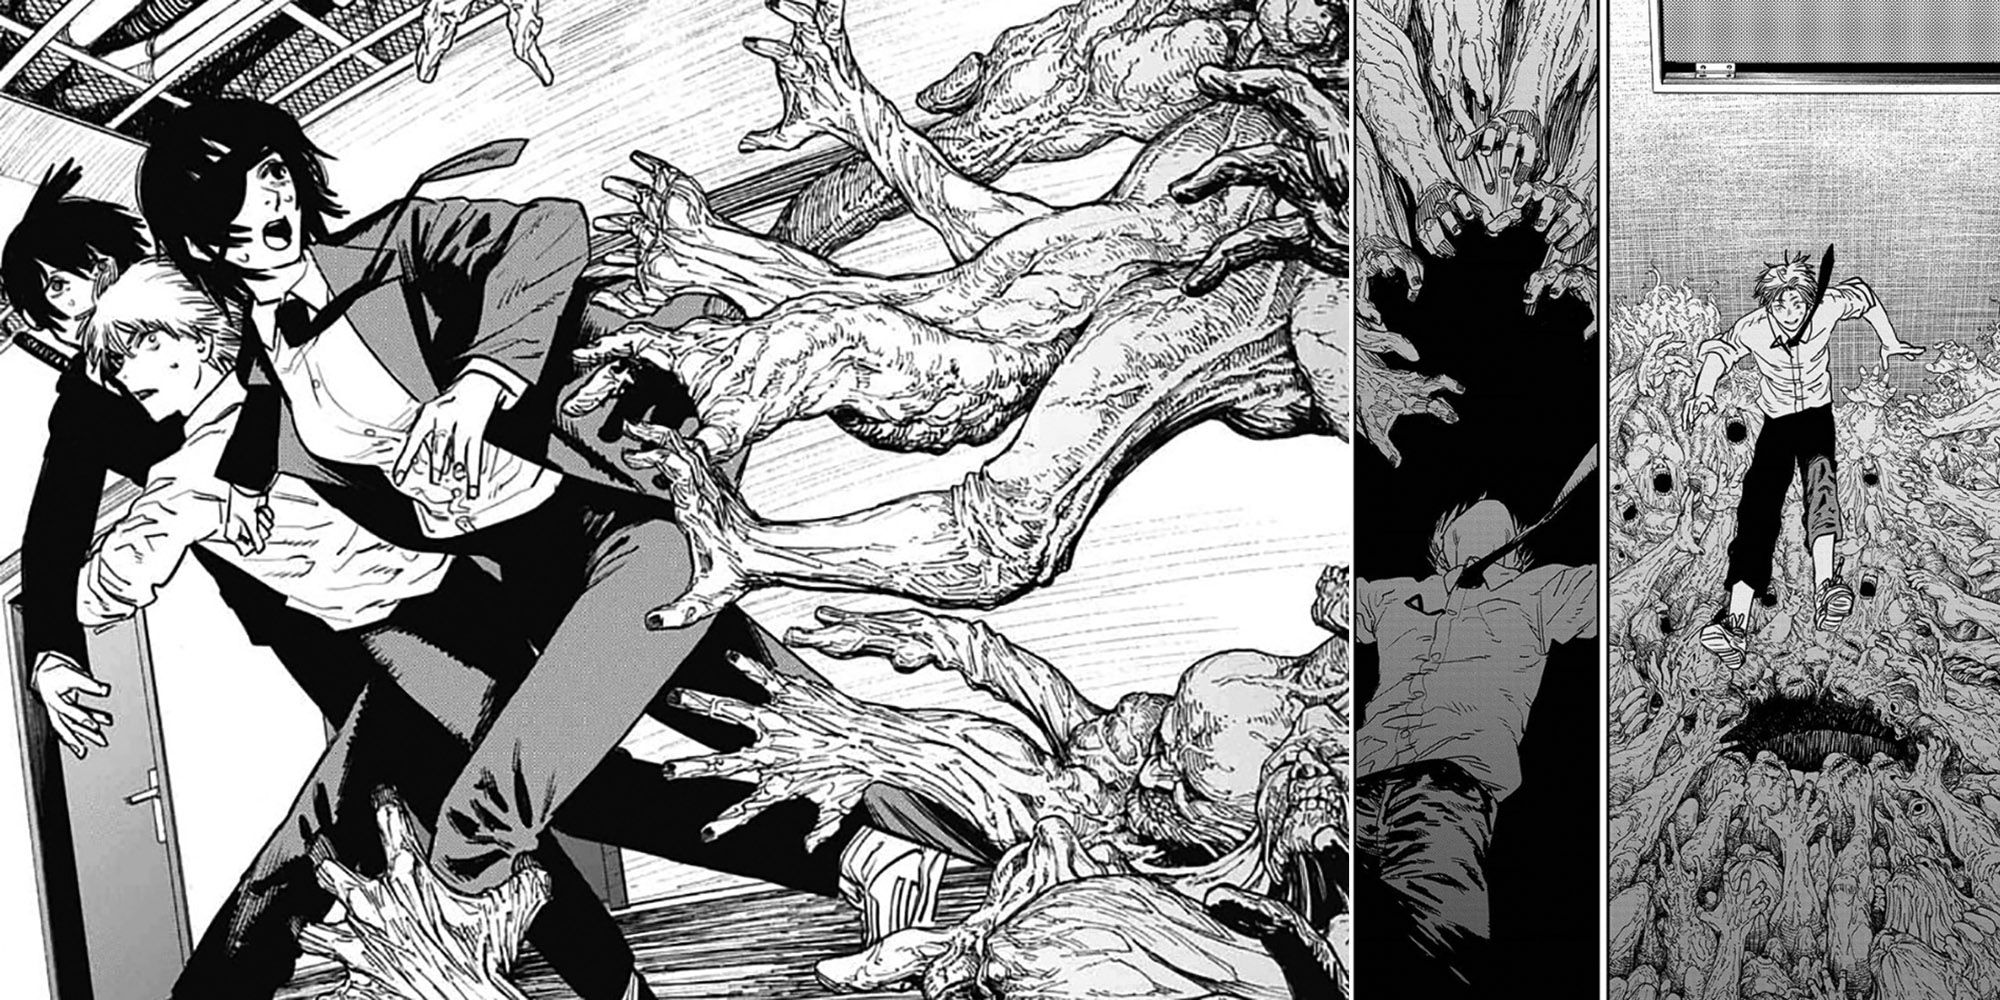 Chainsaw Man - Panels Of Denji And Crew Running From Eternity Devil And Denji Jumping Into Devil's Mouth